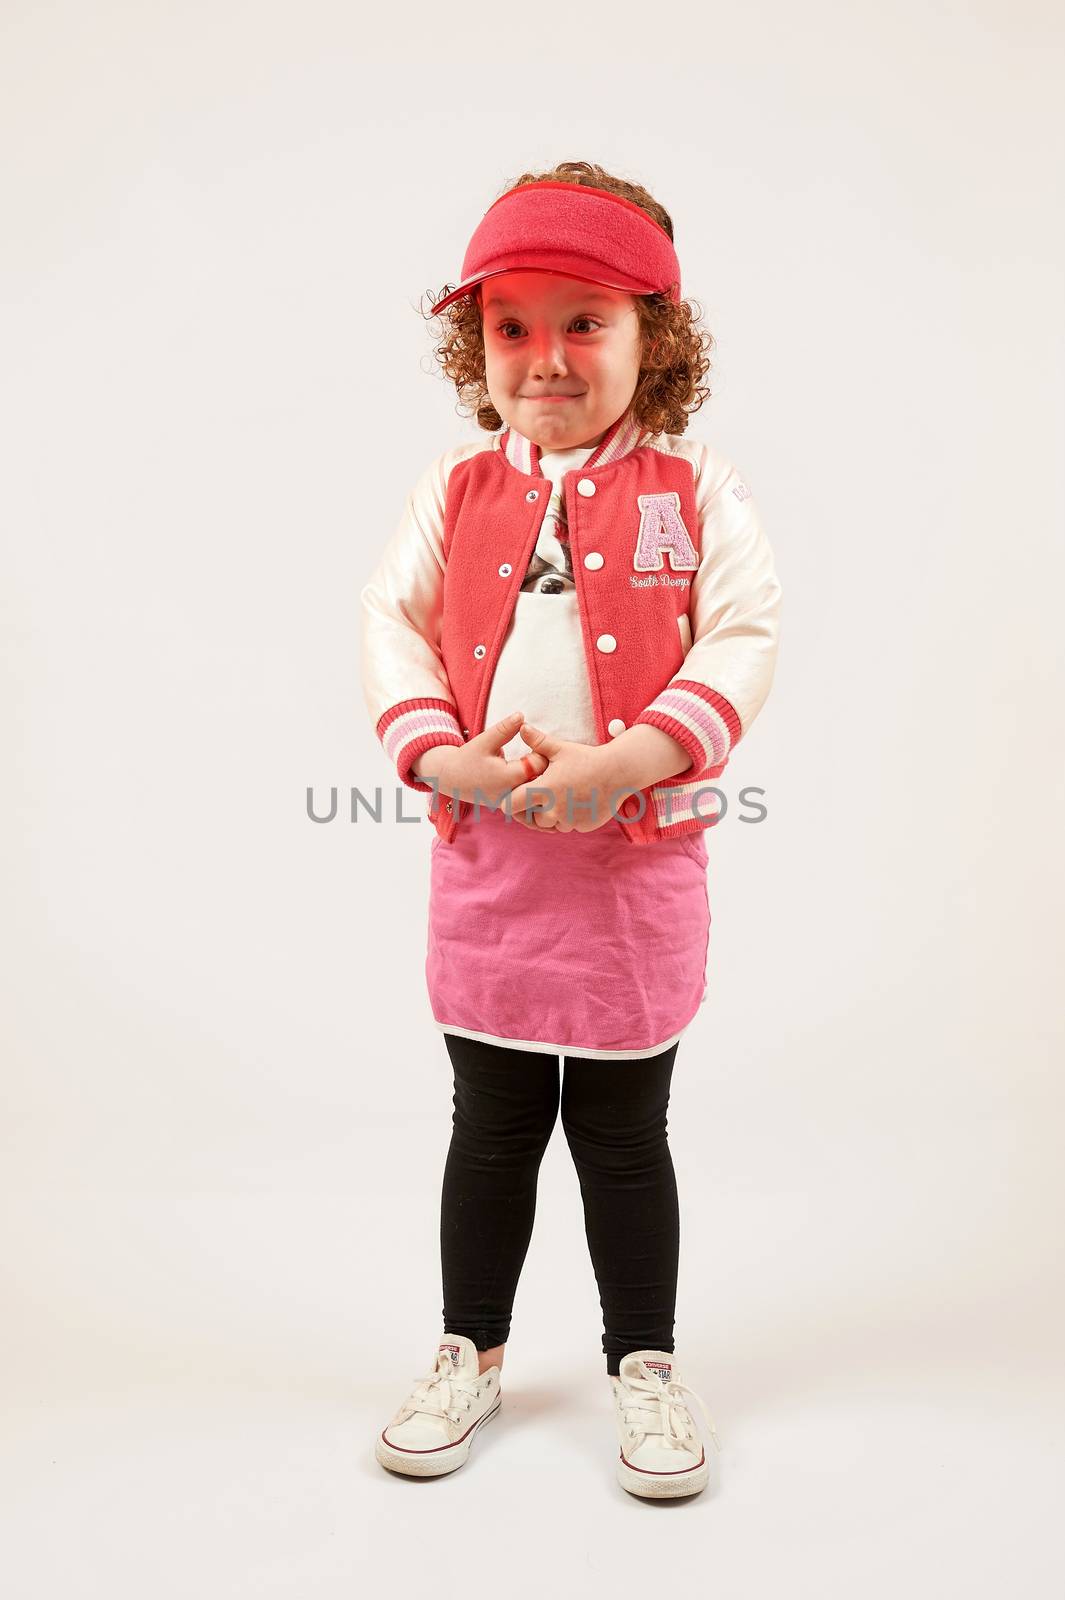 Little Girl Fashion Model With Red Cap by Multipedia